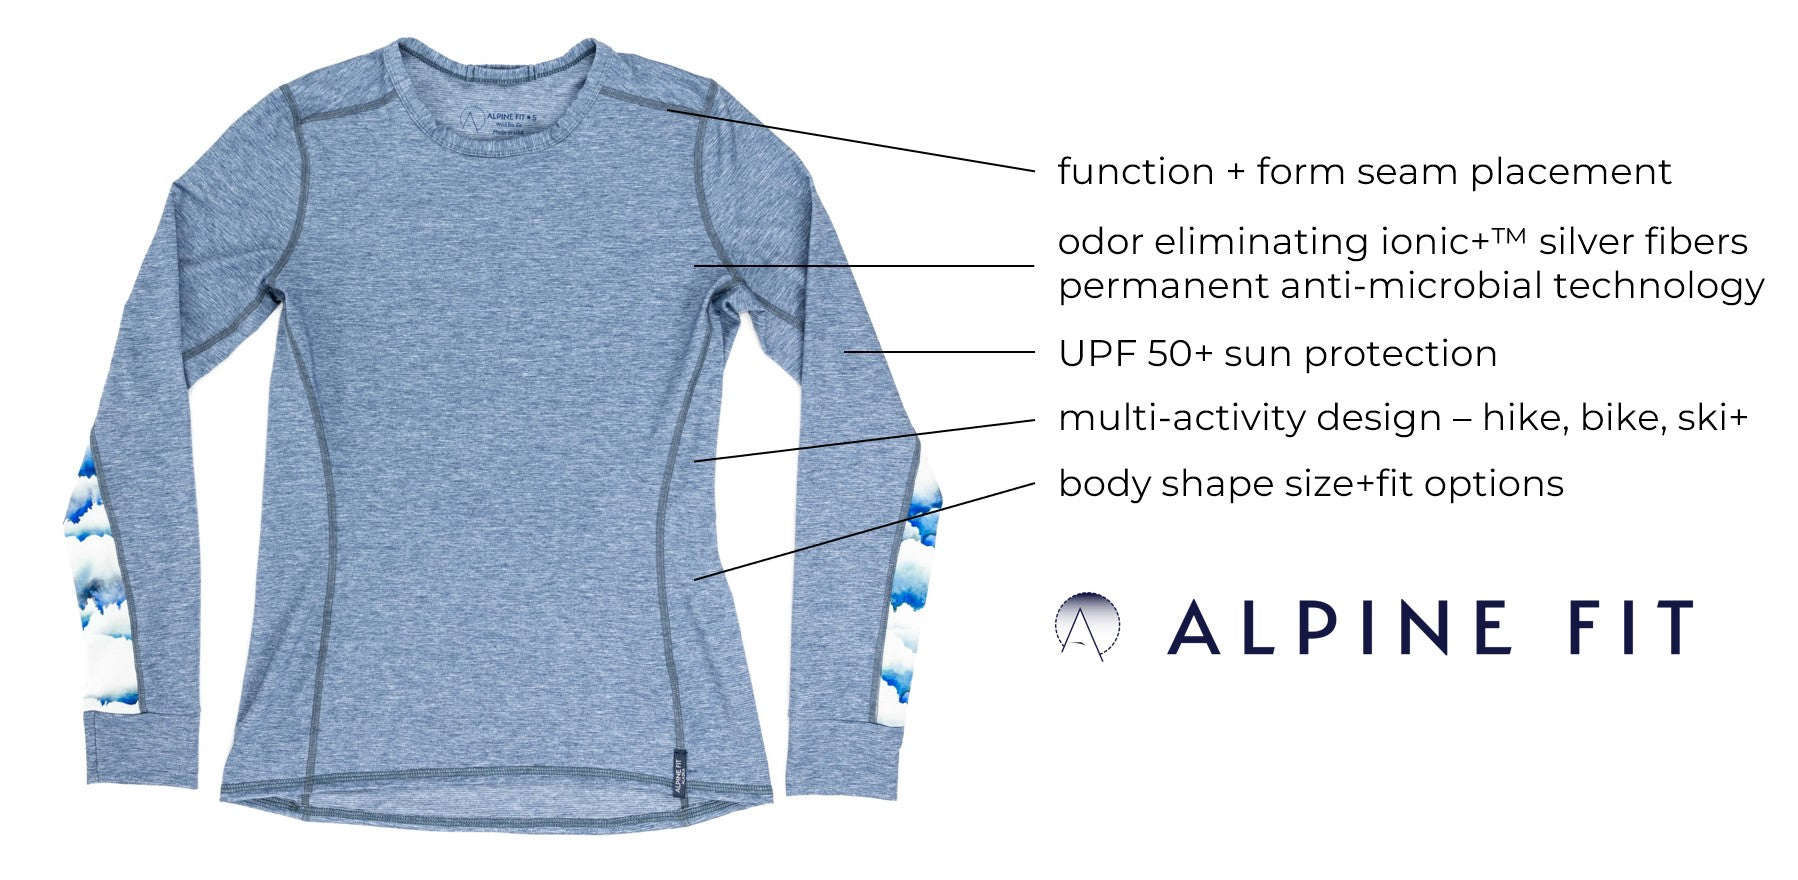 alpine fit alaska made in usa base layers features fabric odor eliminating